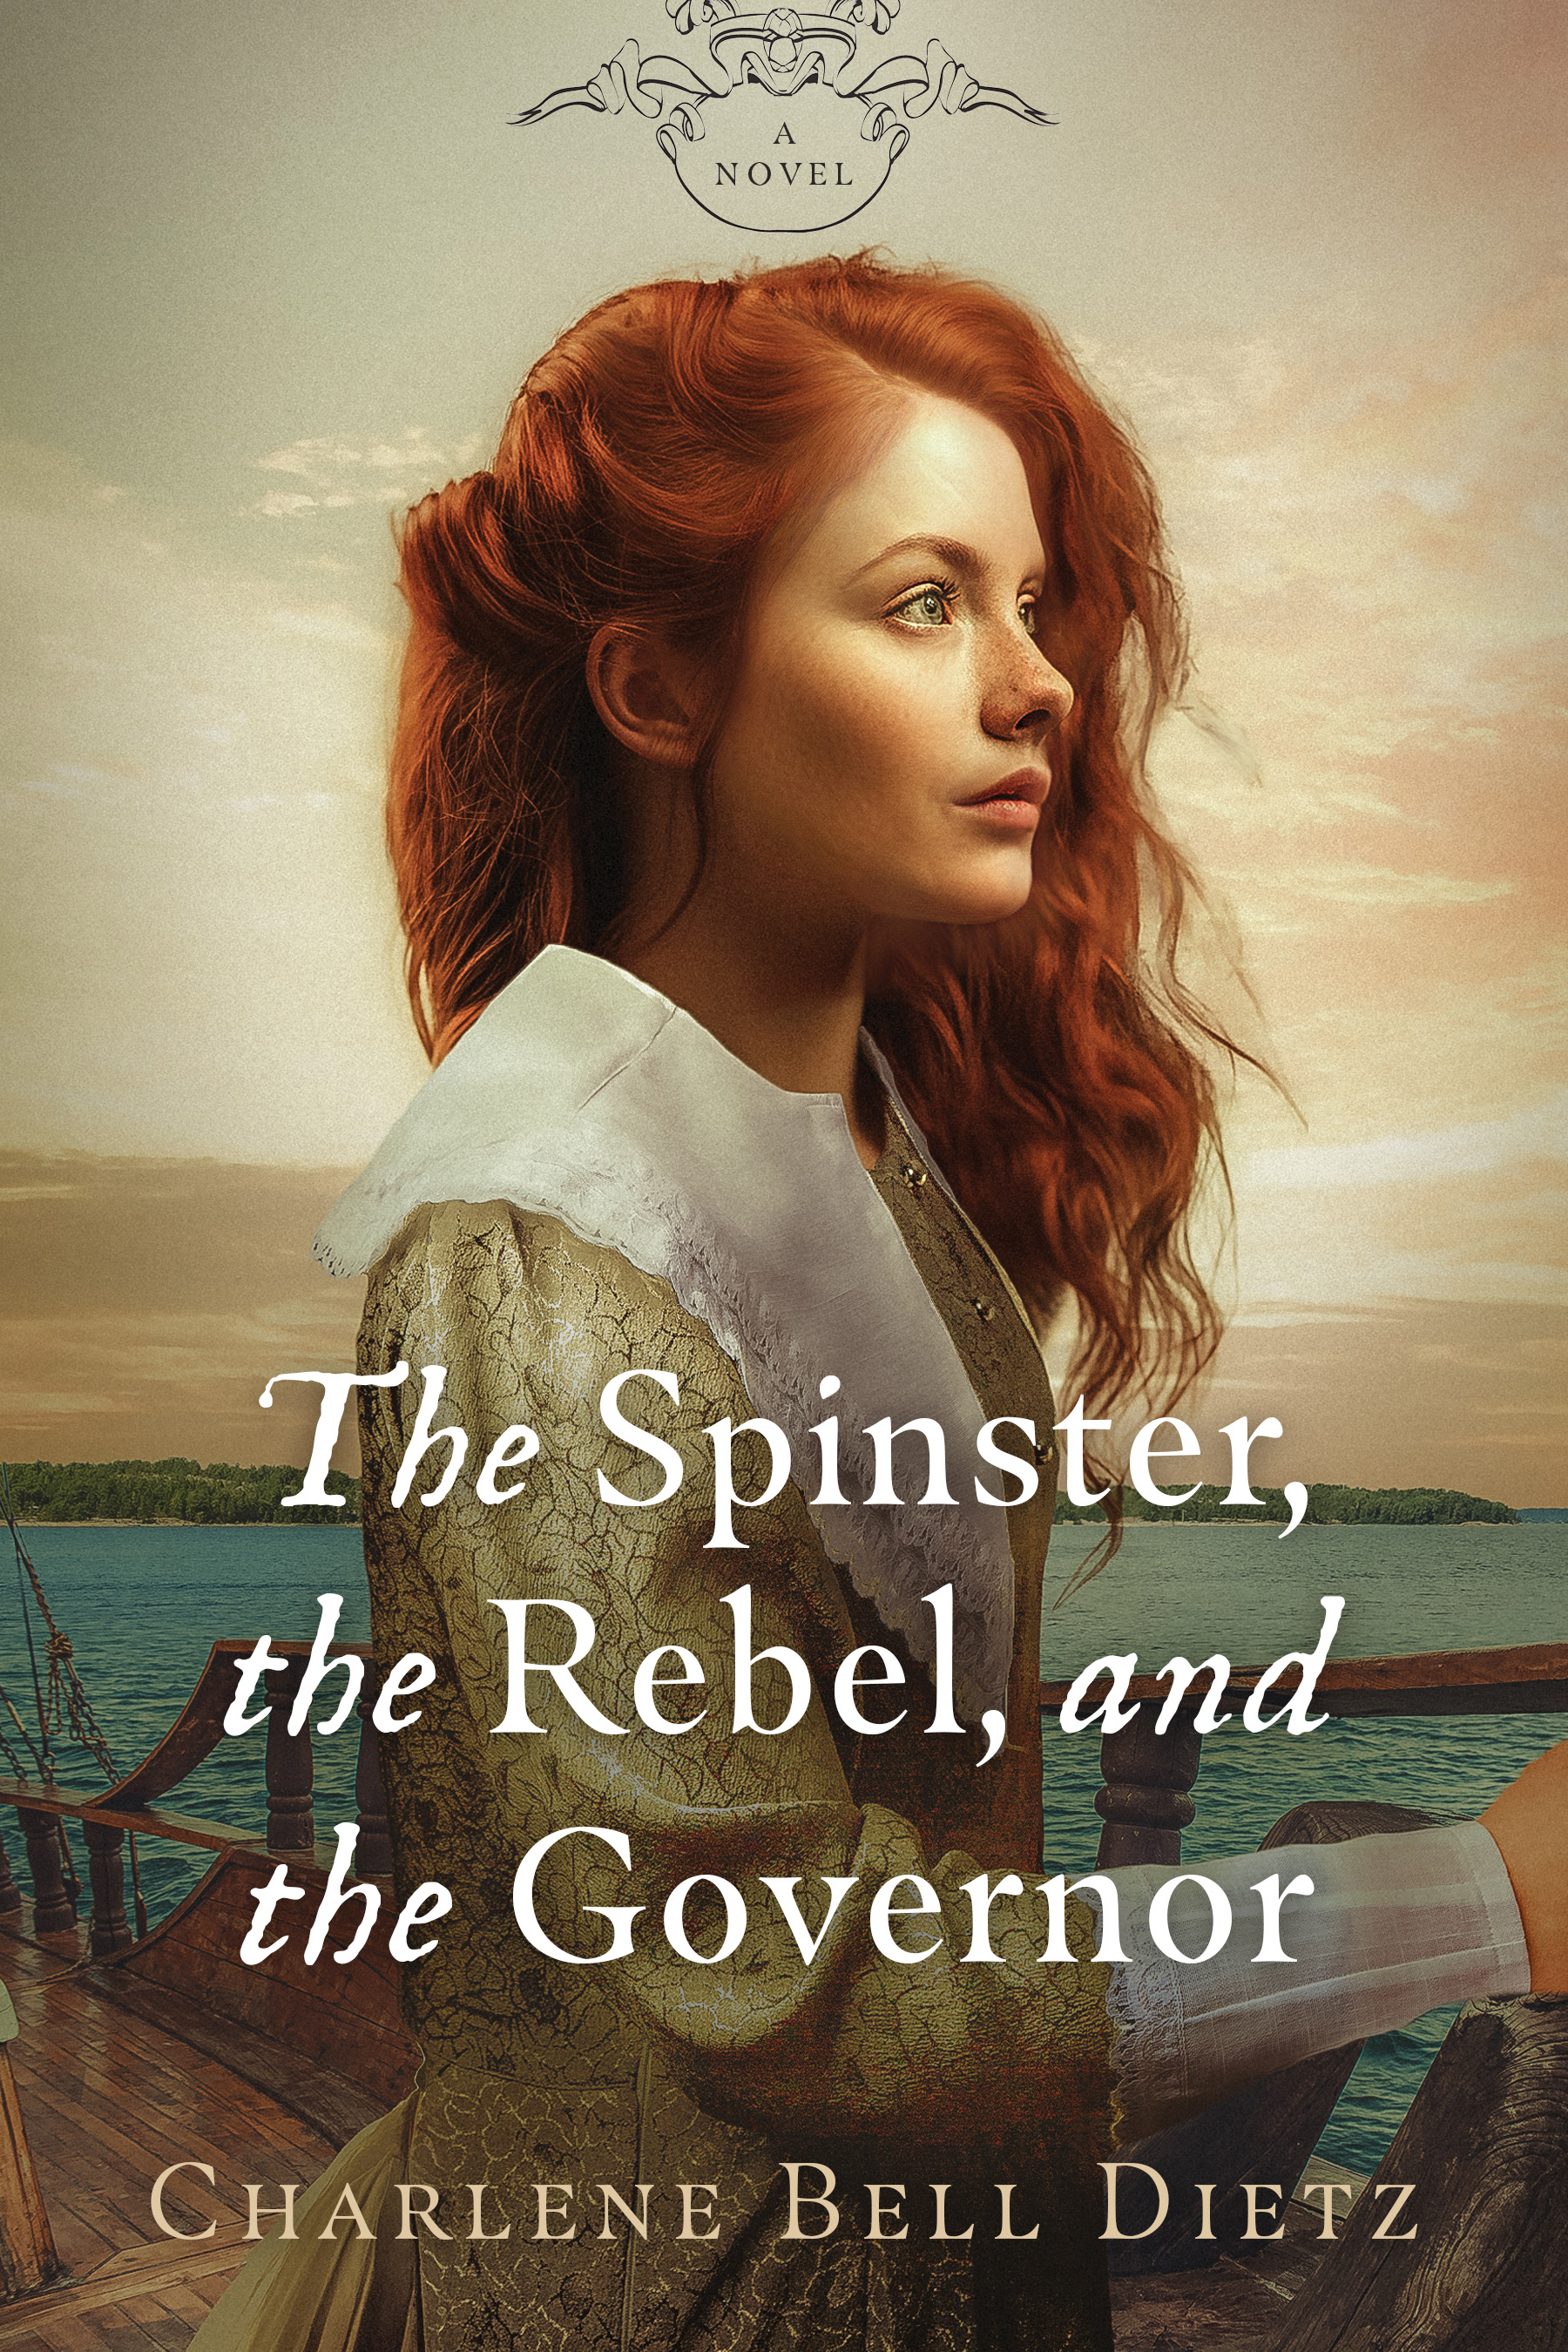 The Spinster, the Rebel, and the Governor book cover